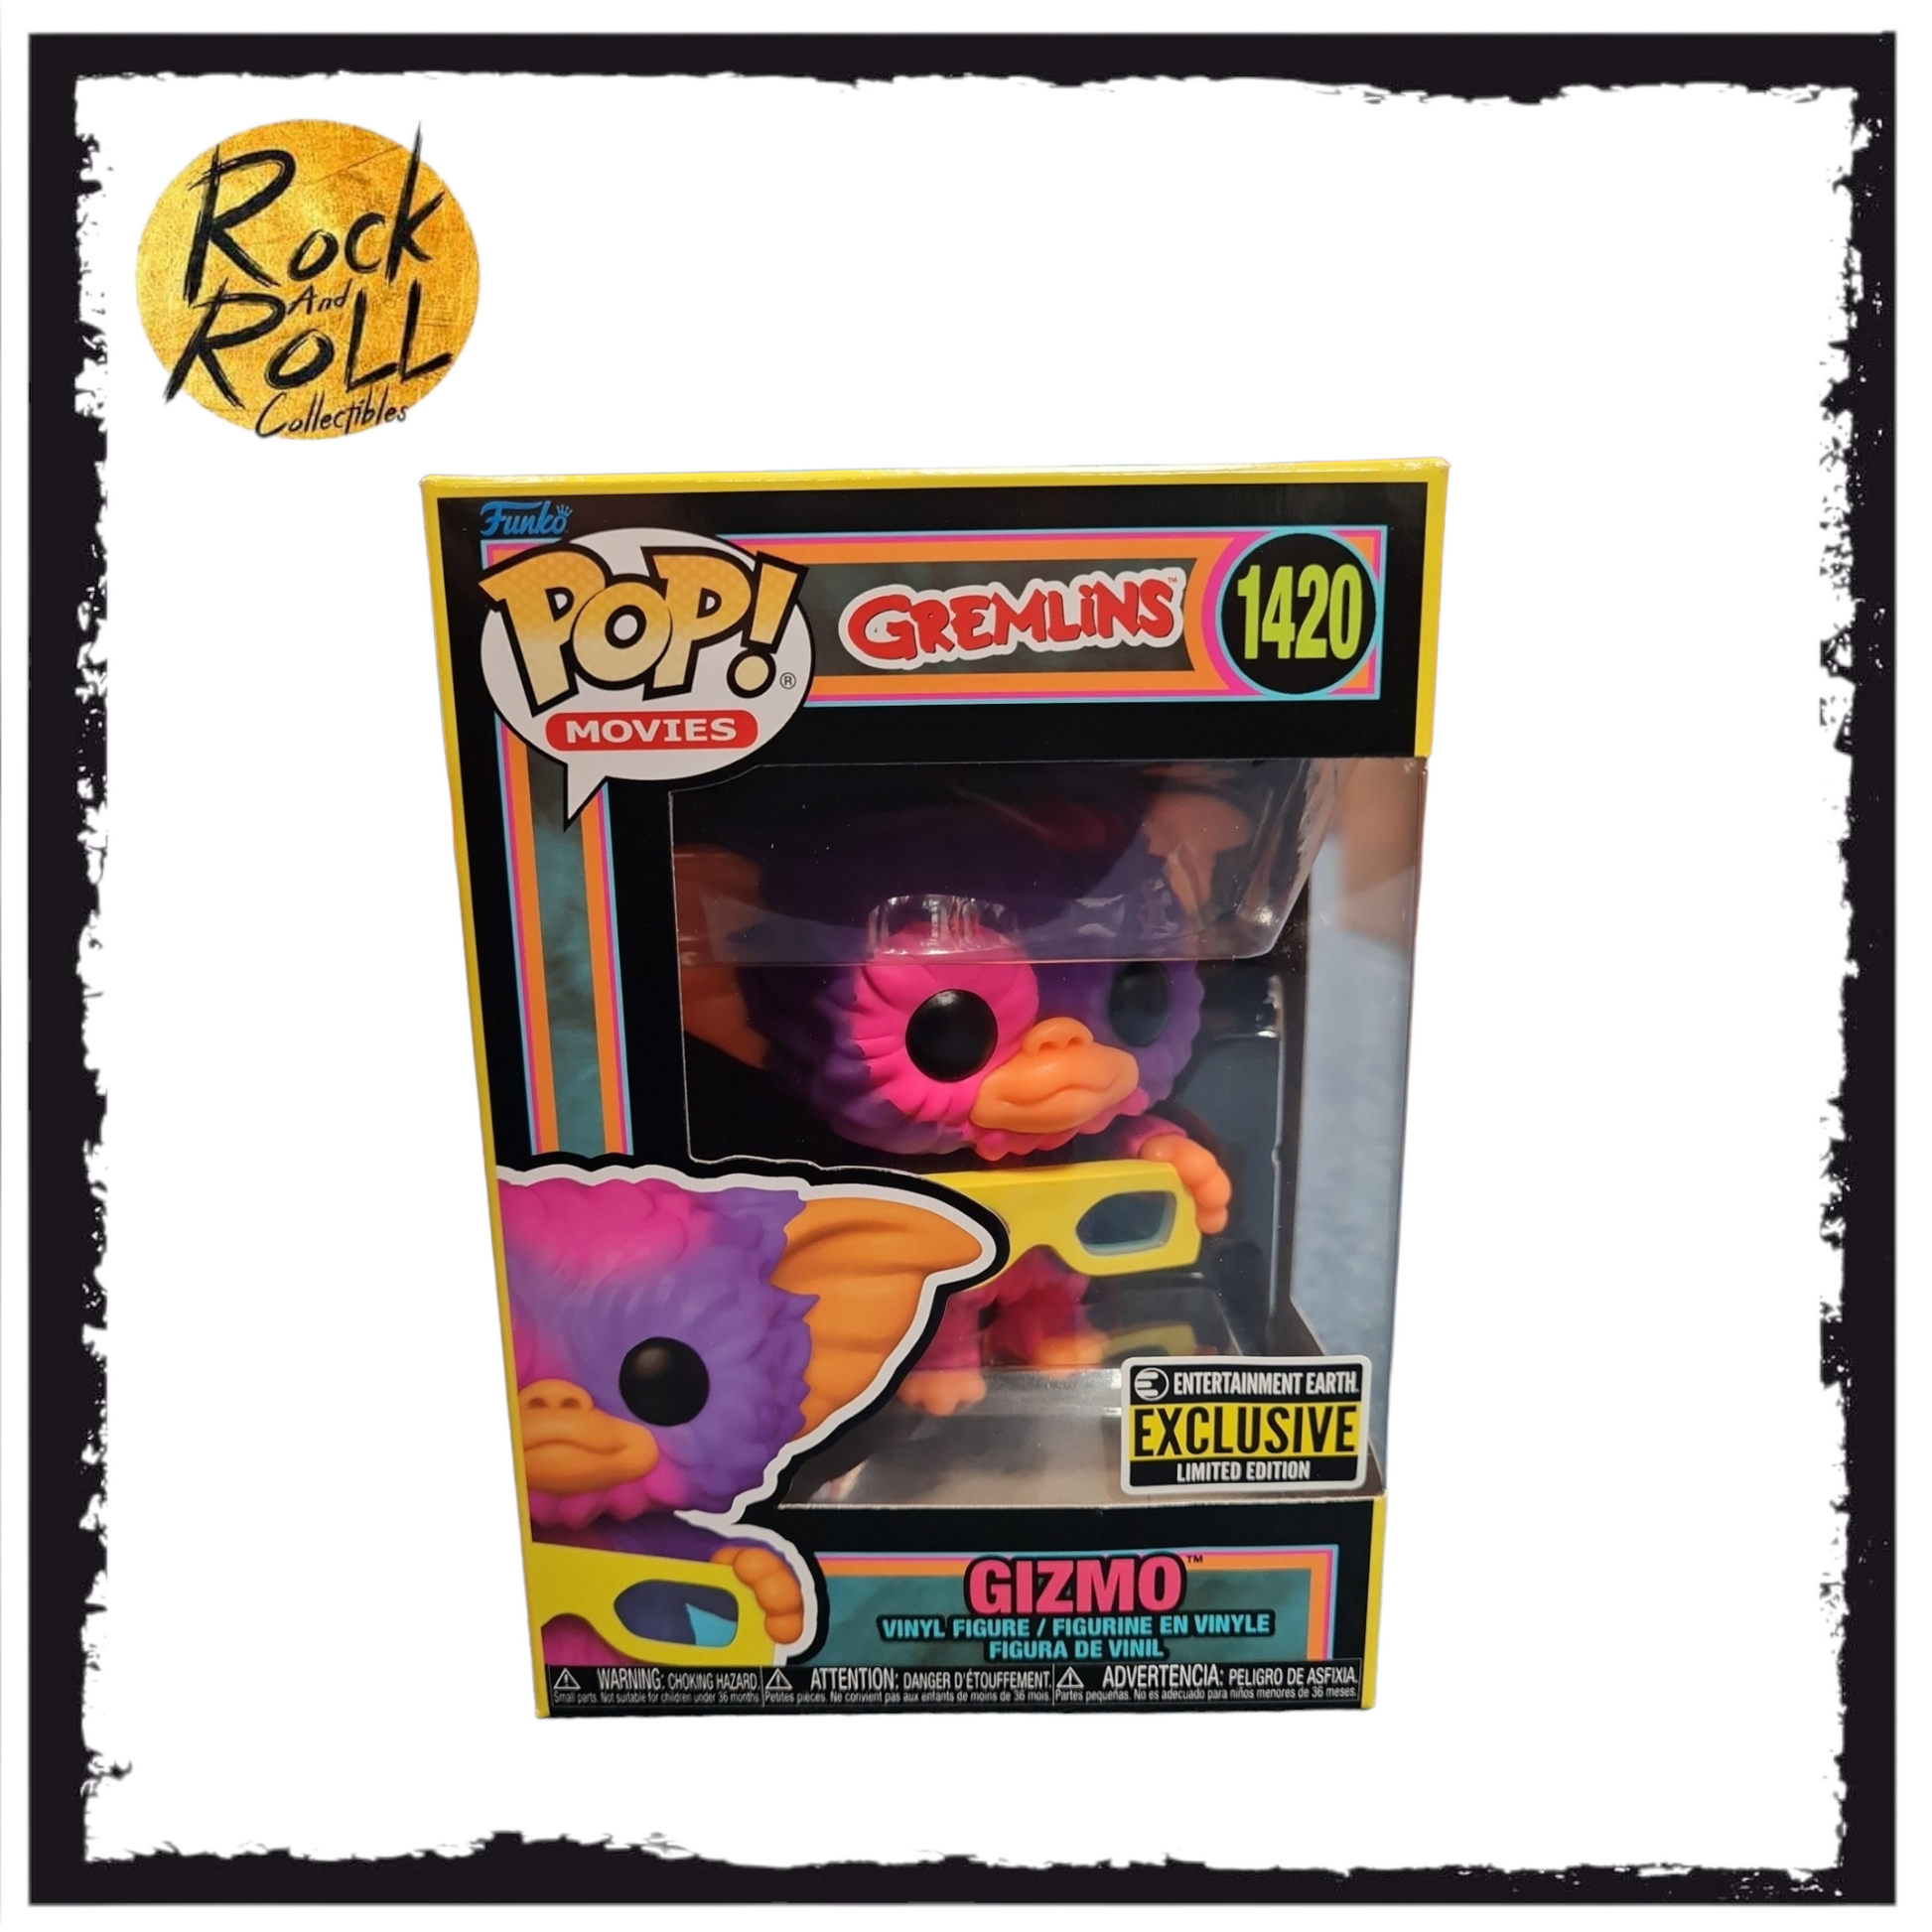 Gremlins - Gizmo Blacklight Funko Pop! #1420 Entertainment Earth Exclu –  rock and roll collectibles